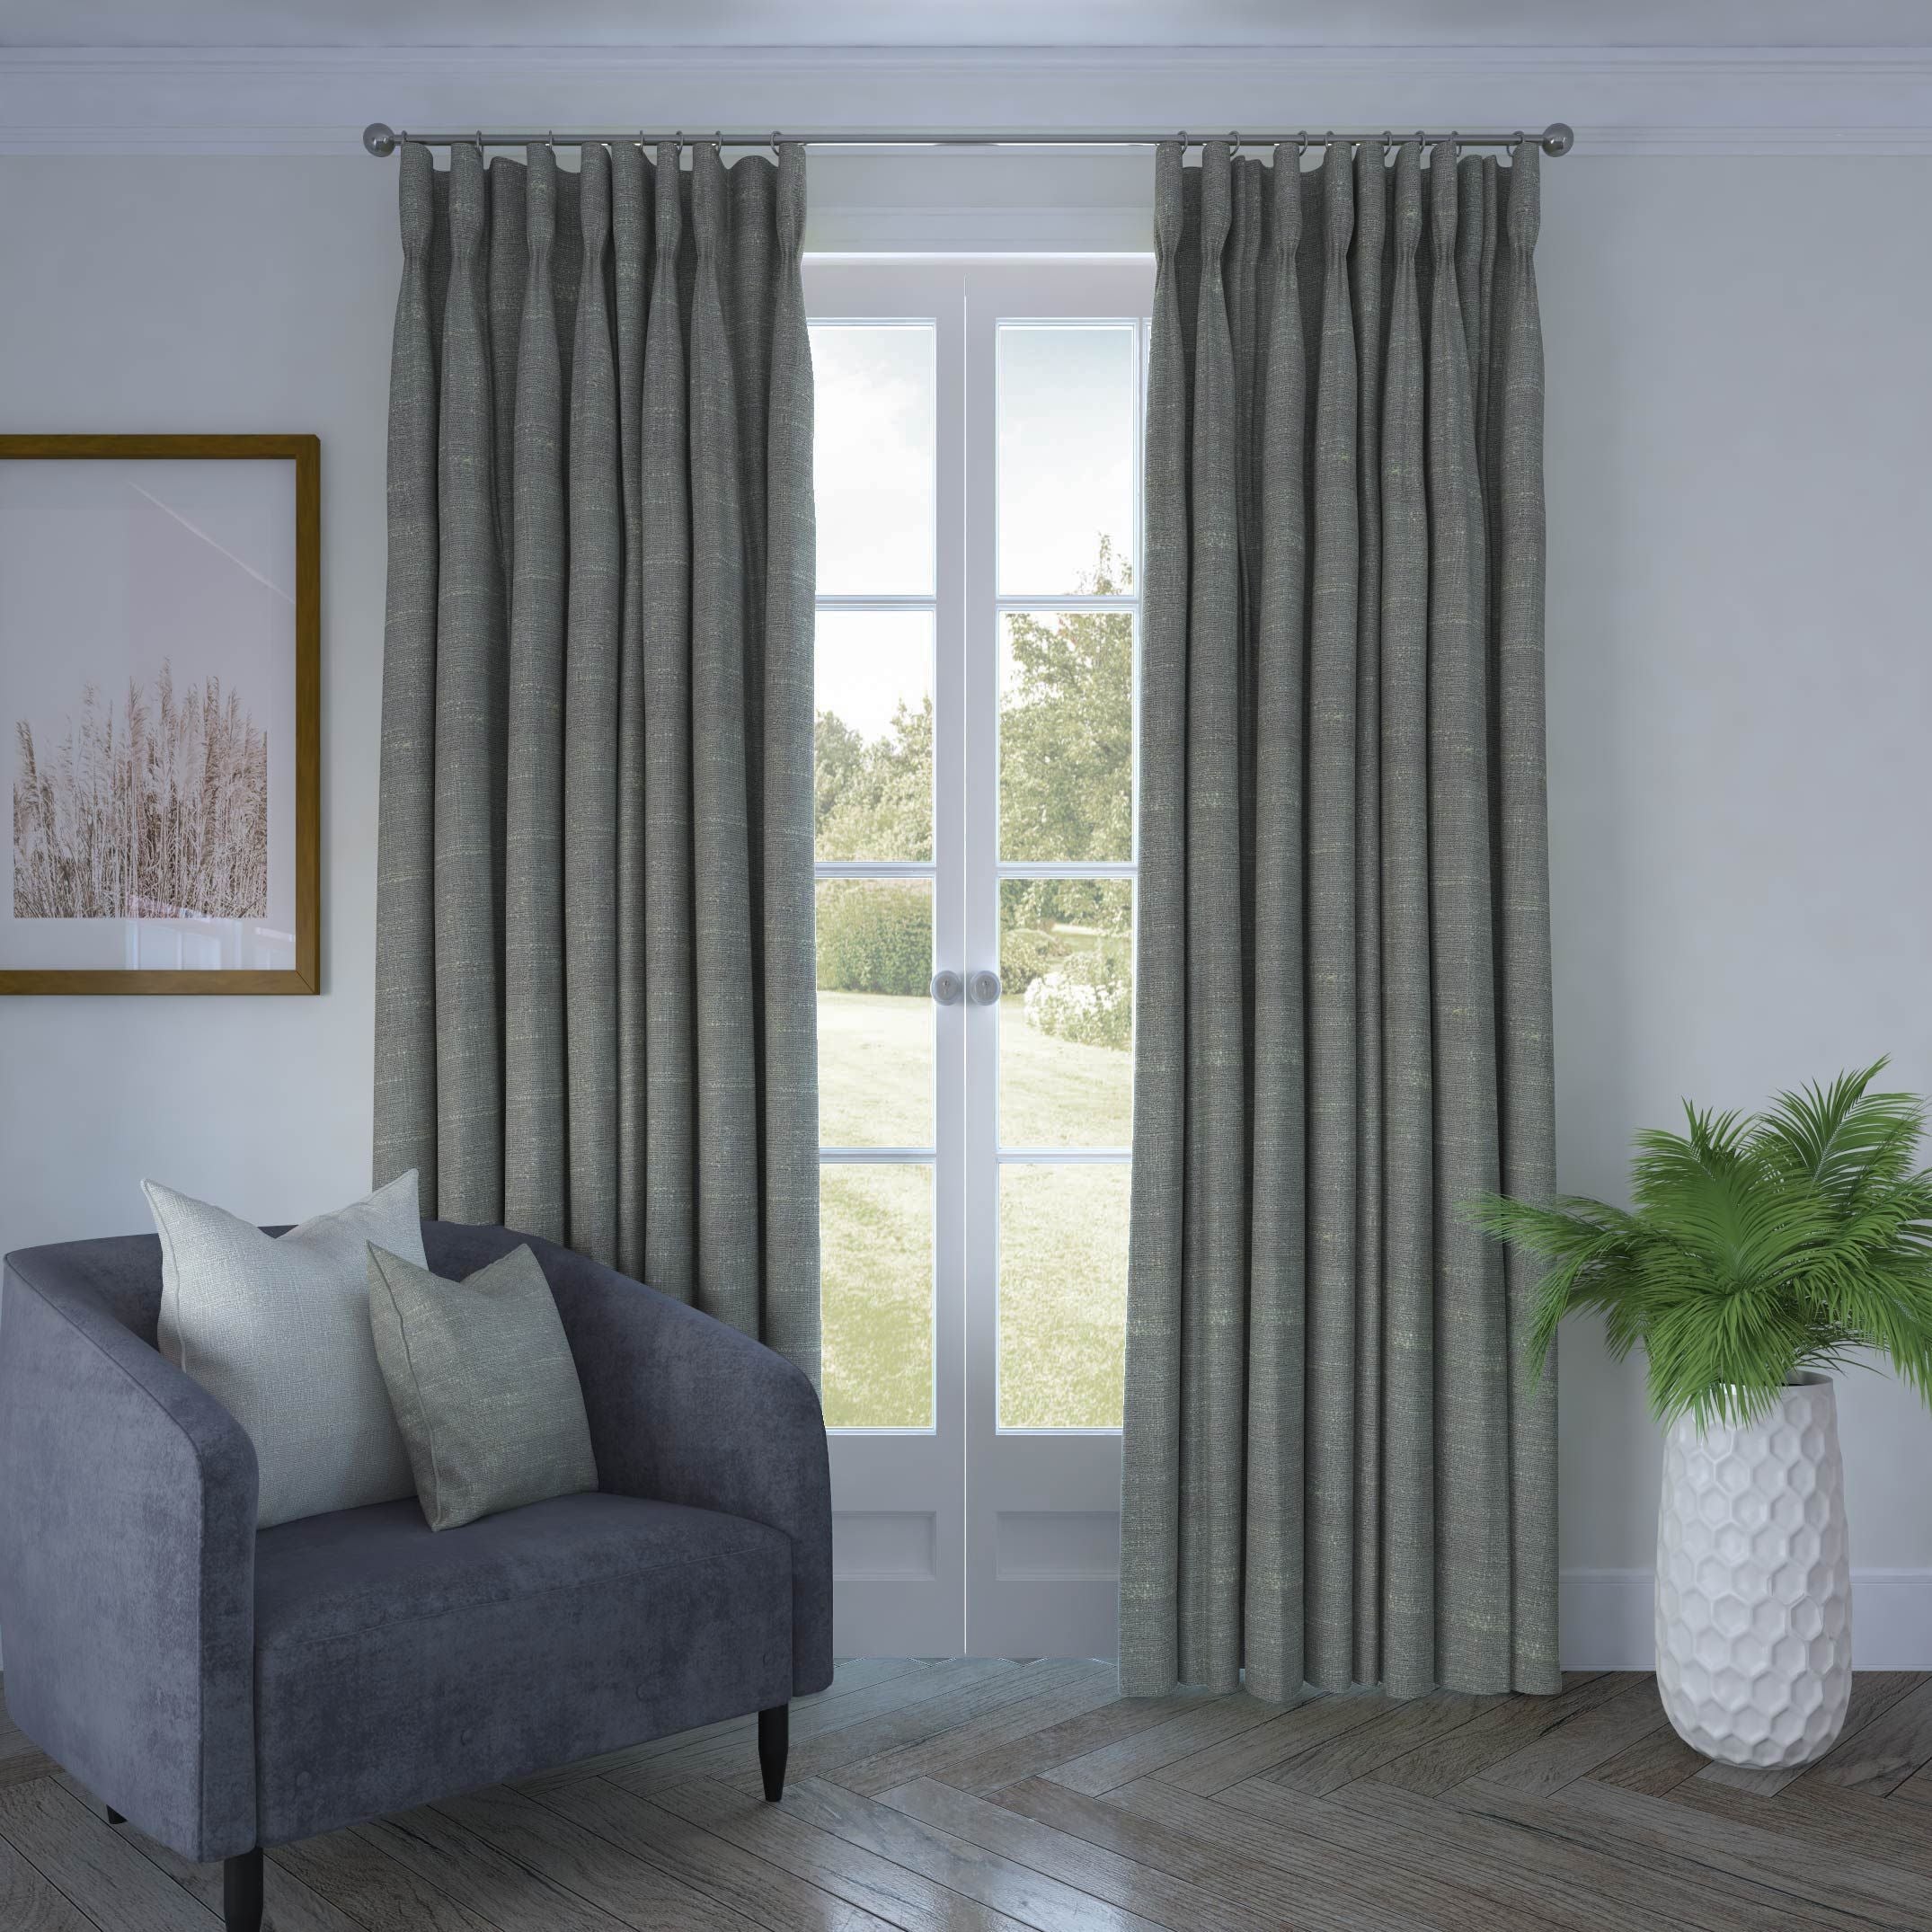 McAlister Textiles Harmony Linen Blend Grey Textured Curtains Tailored Curtains 